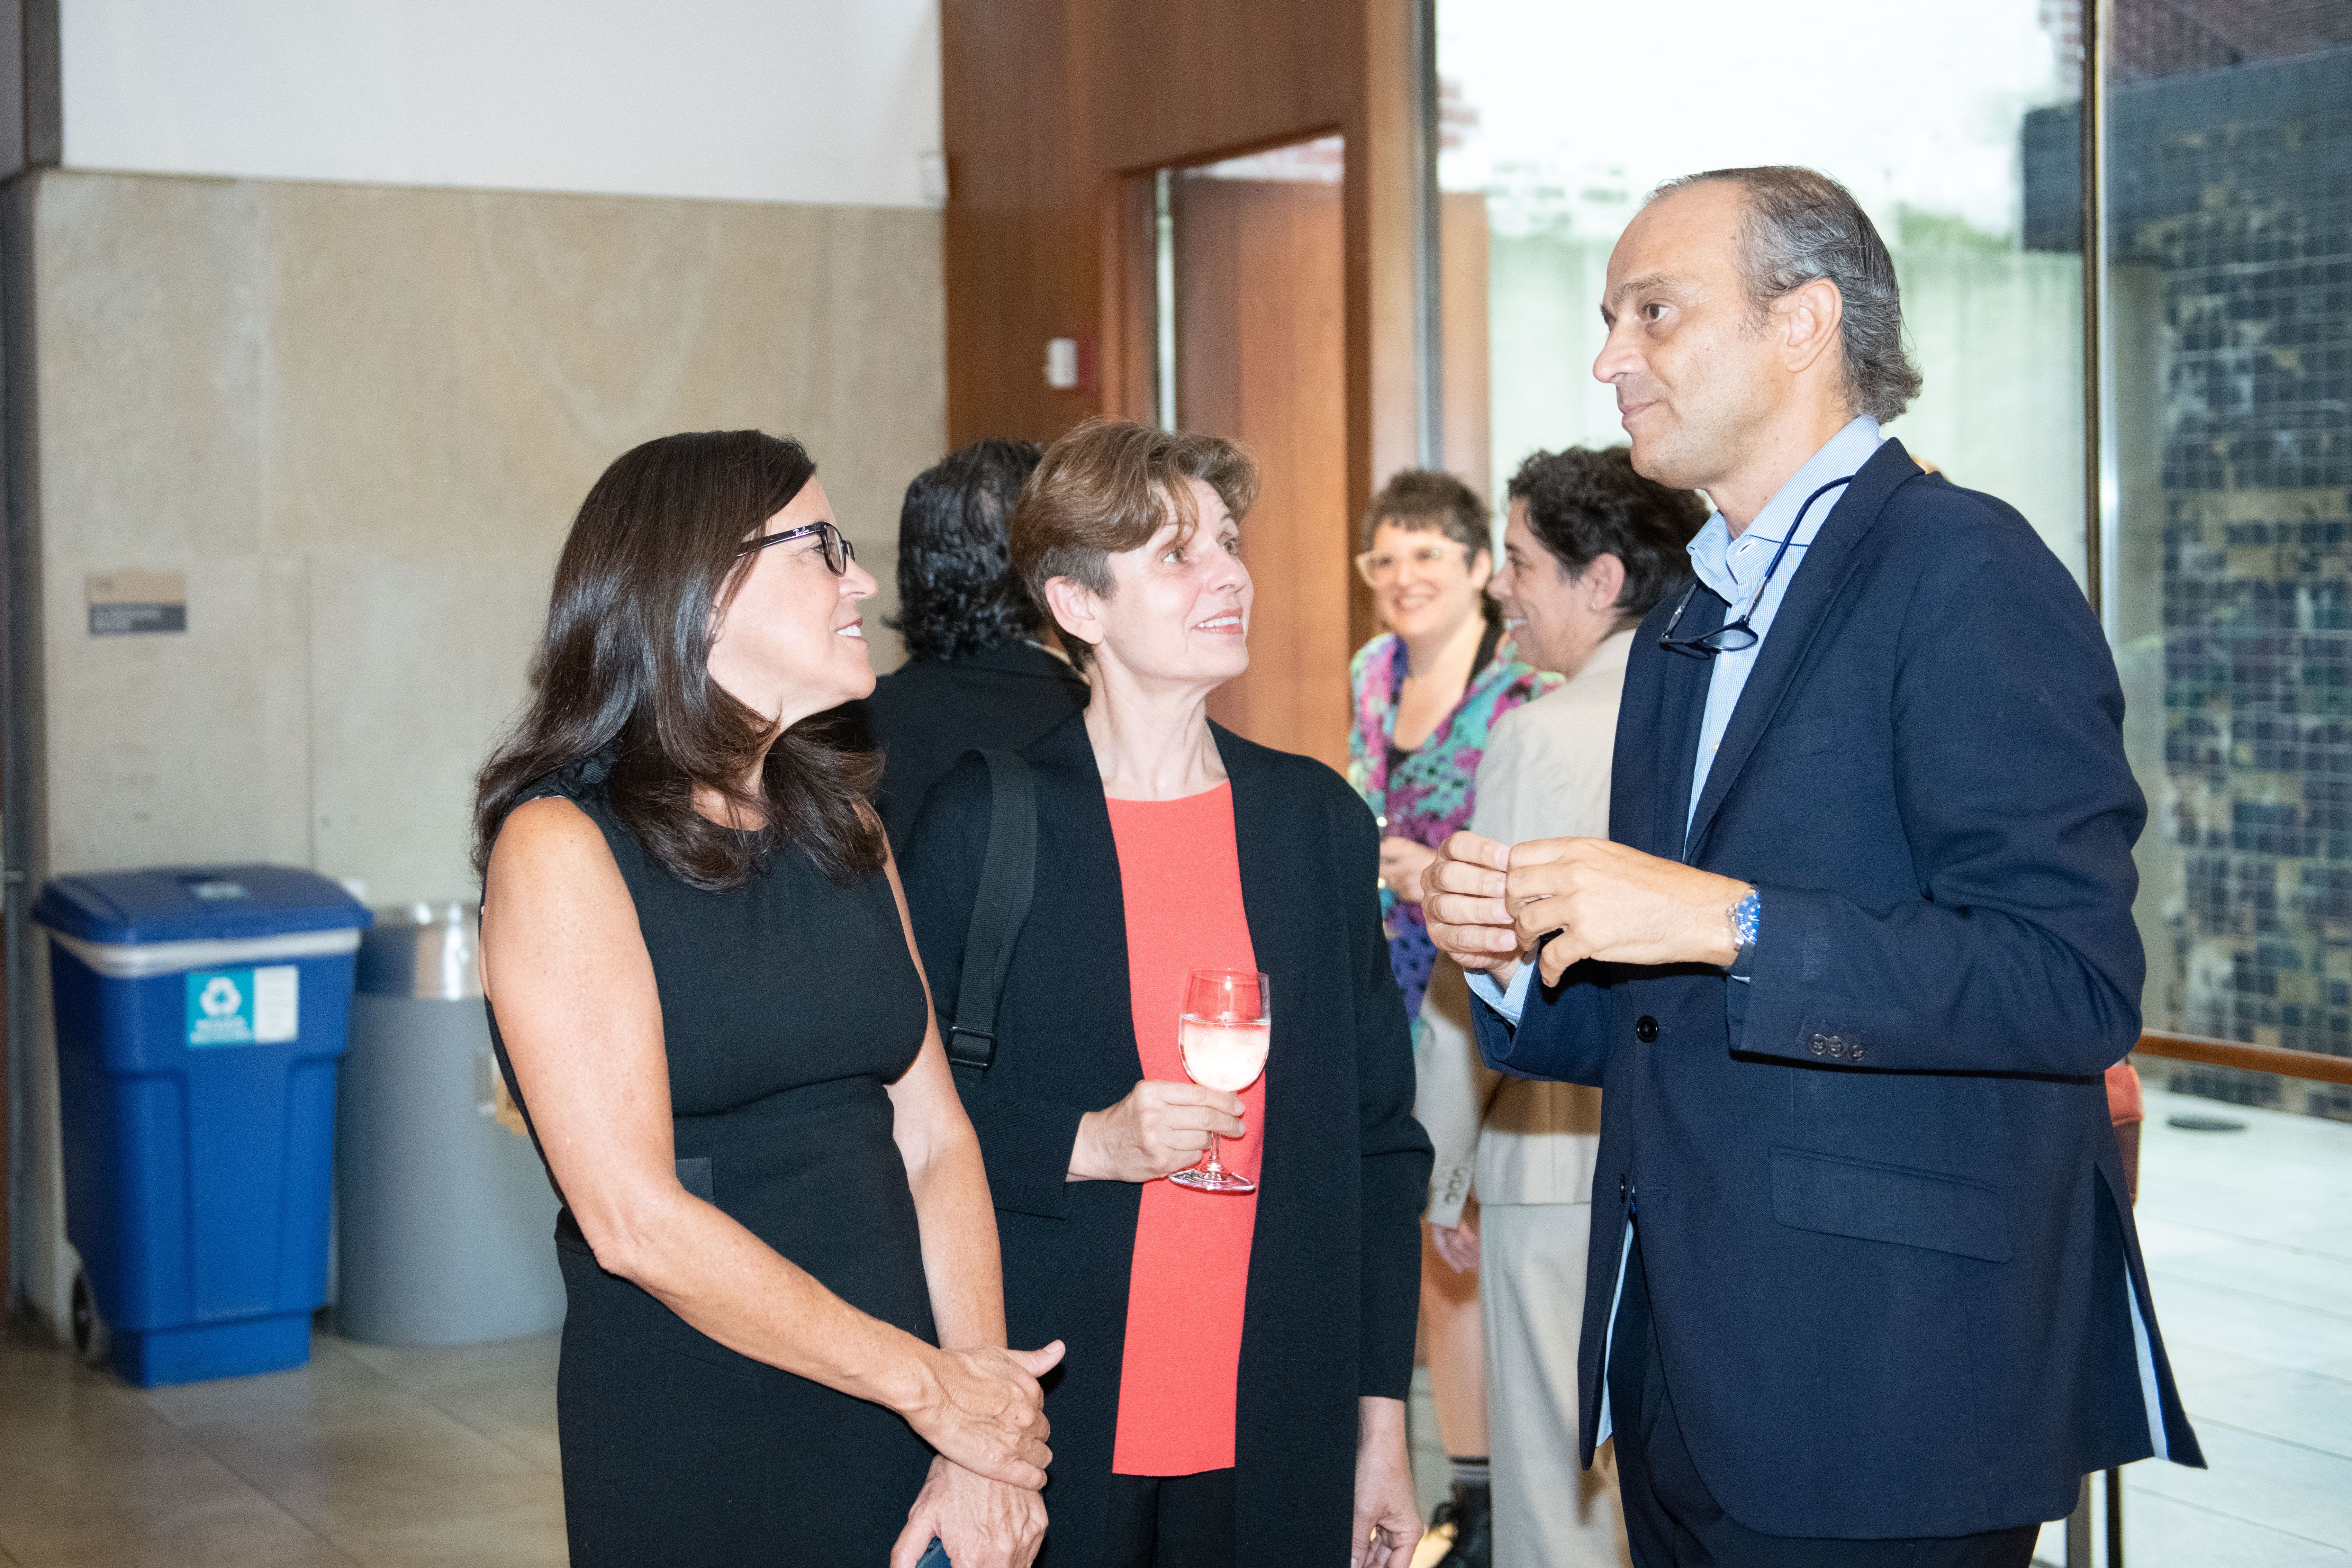 Georgina Dopico, Interim Provost; Gabriela Basterra, Chair of the NYU Department of Spanish and Portuguese; and Miguel Albero, Cultural Counselor of the Embassy of Spain in Washington, D.C. Photo: @Creighton: Courtesy of NYU Photo Bureau